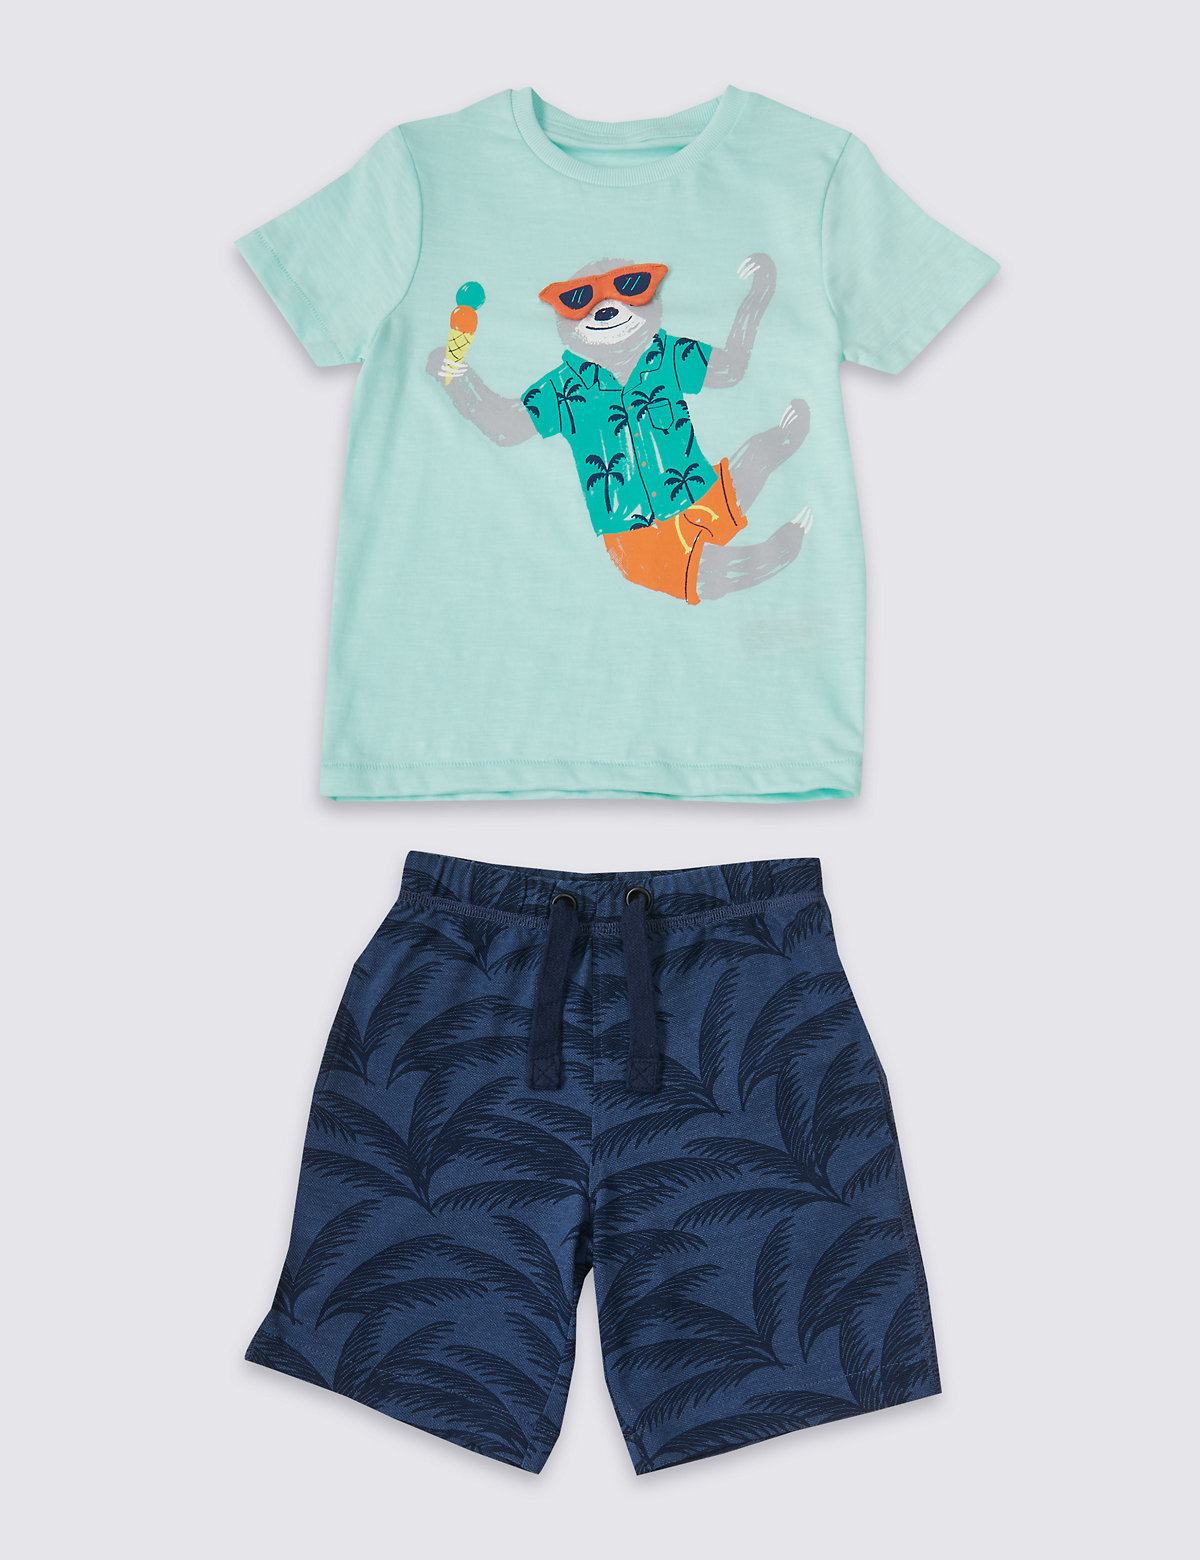 2 Piece Sloth Top & Shorts Outfit (3 Months - 7 Years)